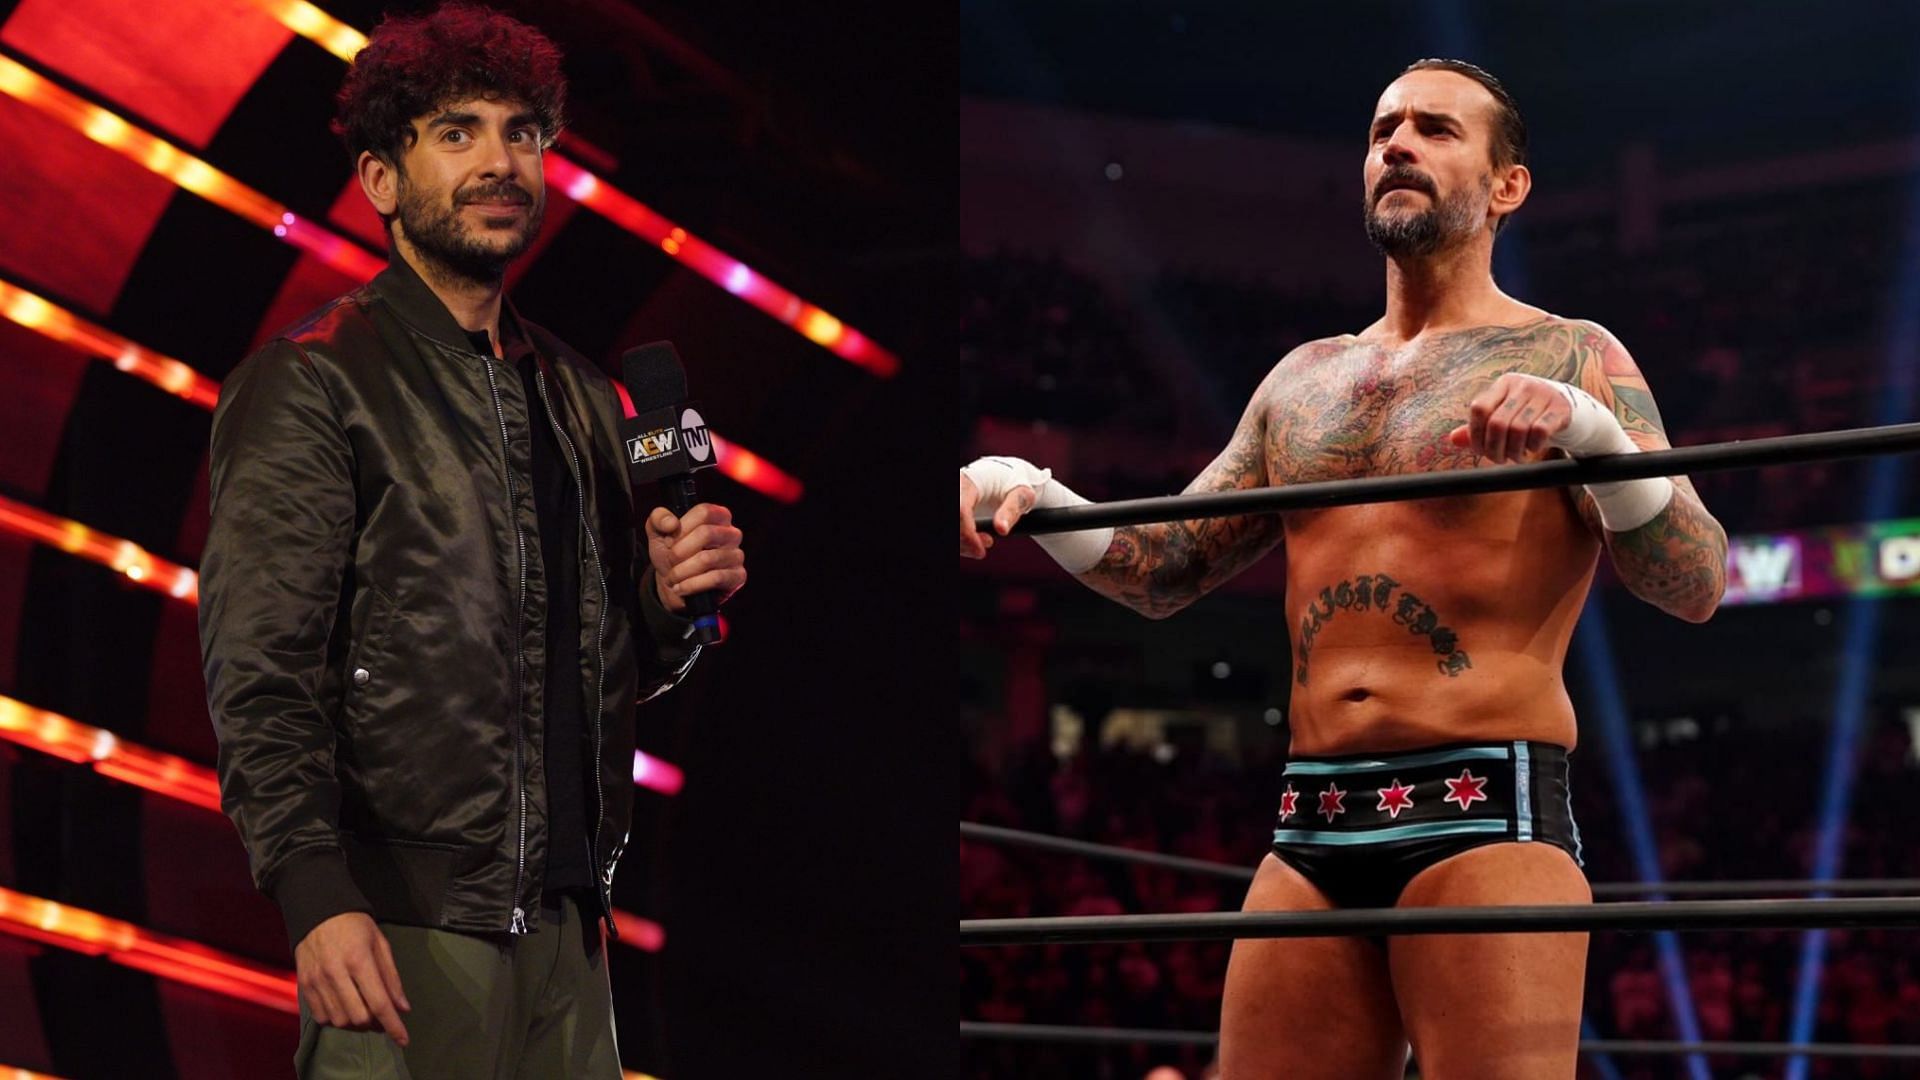 Could there be tension between CM Punk and Tony Khan?